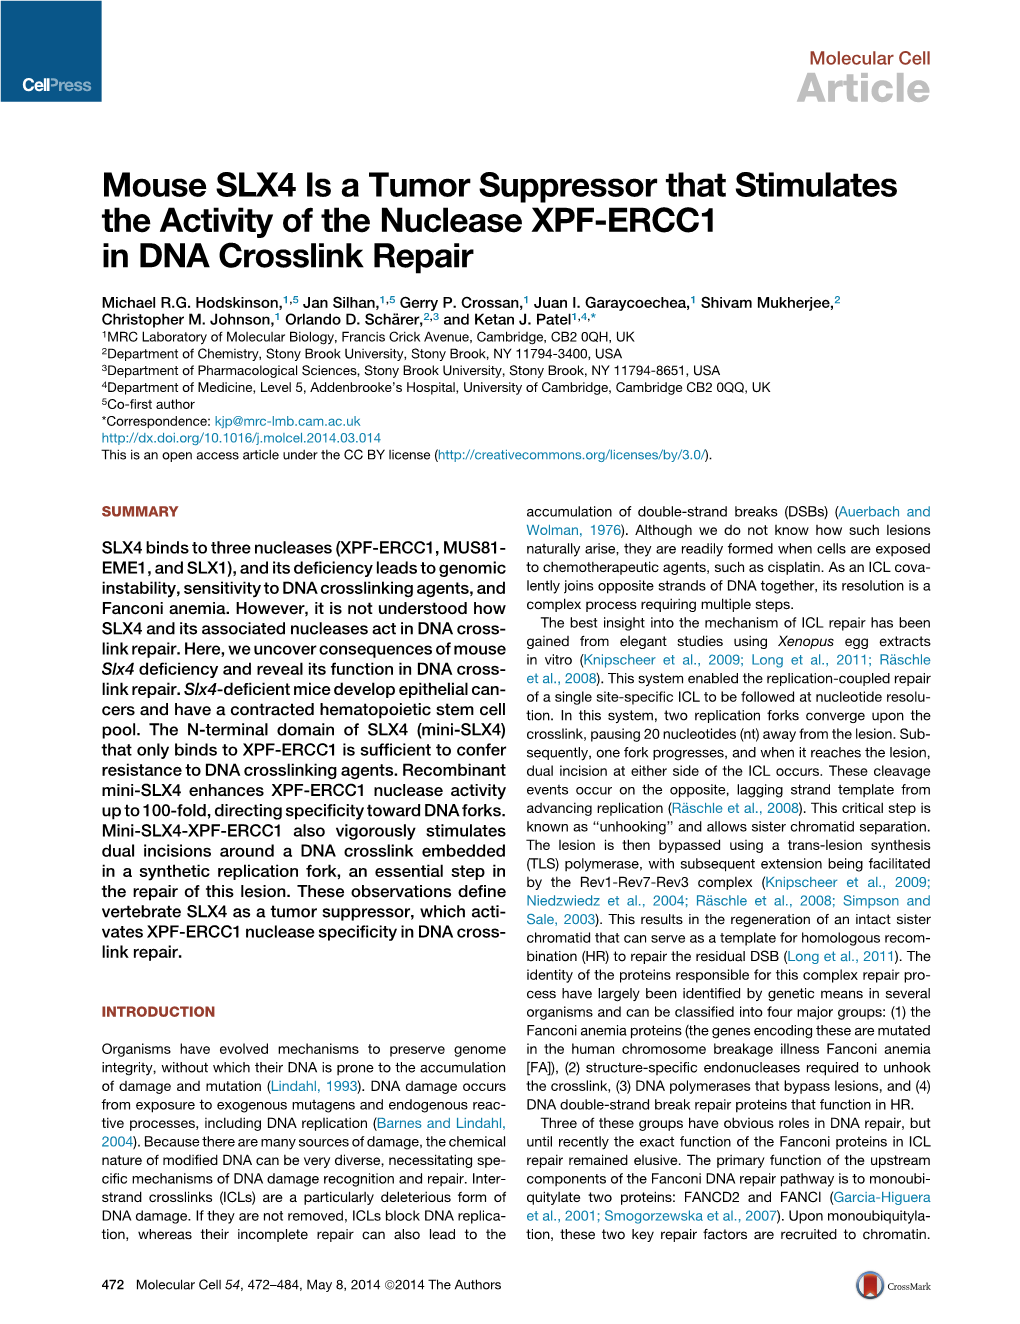 Mouse SLX4 Is a Tumor Suppressor That Stimulates the Activity of the Nuclease XPF-ERCC1 in DNA Crosslink Repair